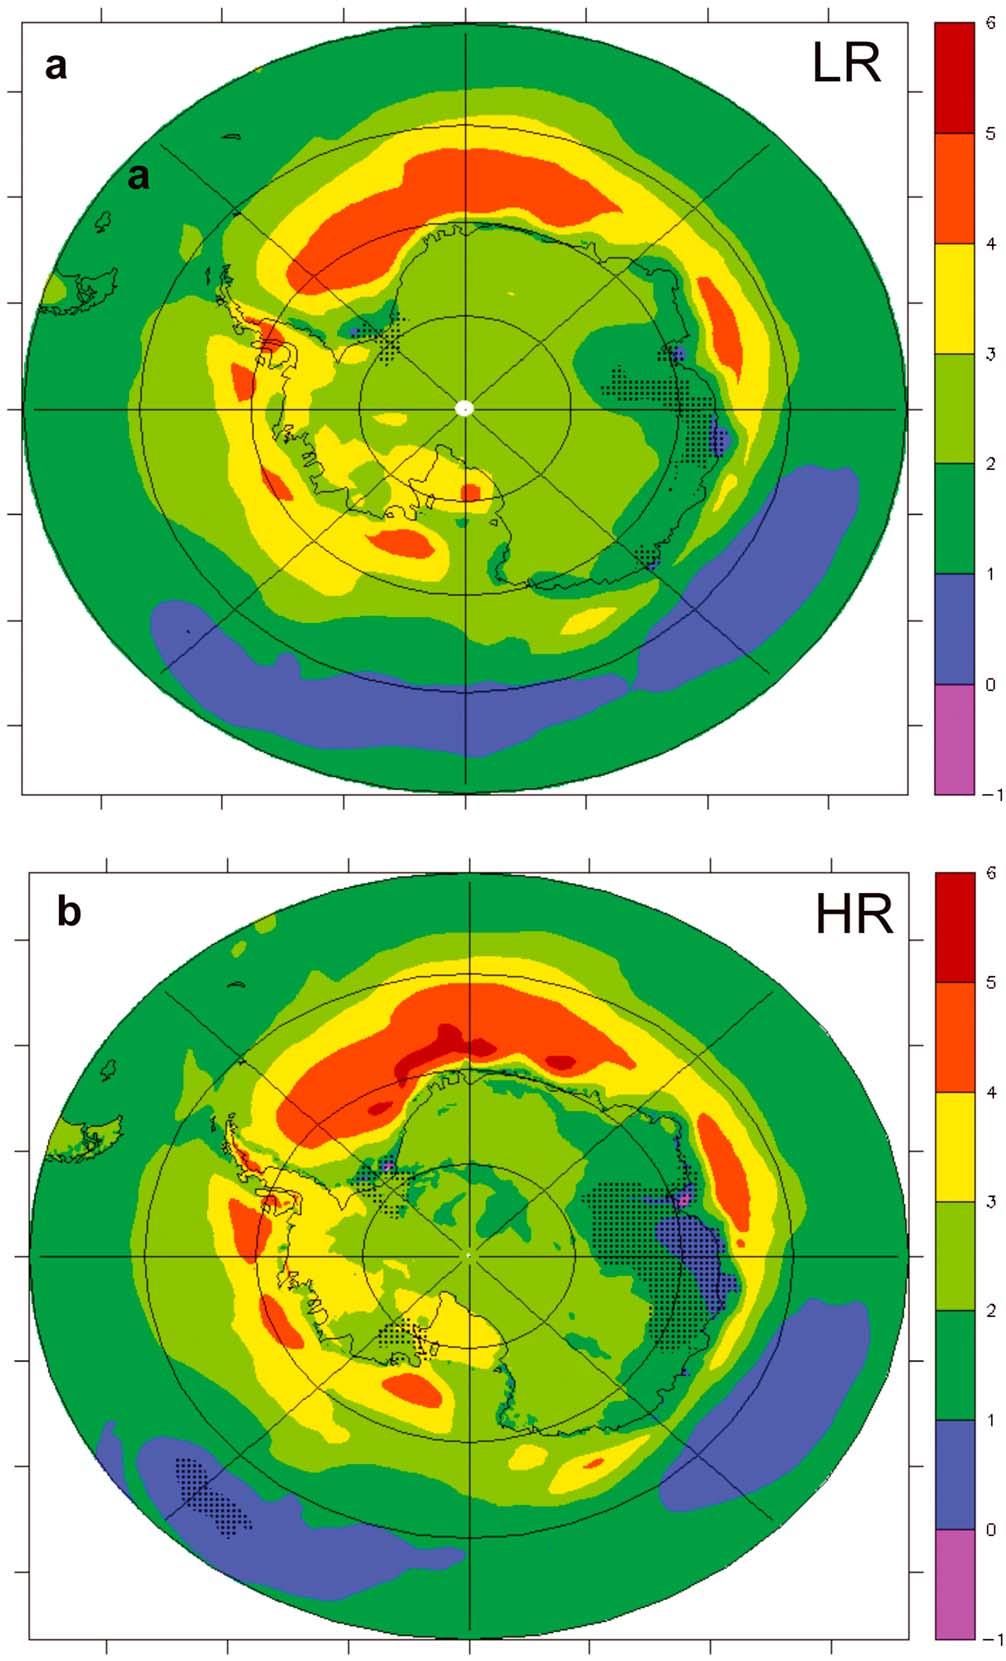 Figure 3. Twenty-first century annual mean changes in surface air temperature (2 m, in K) (2094 2098 average minus 2002 2006 average) for (a) low resolution (LR) and (b) high resolution (HR).